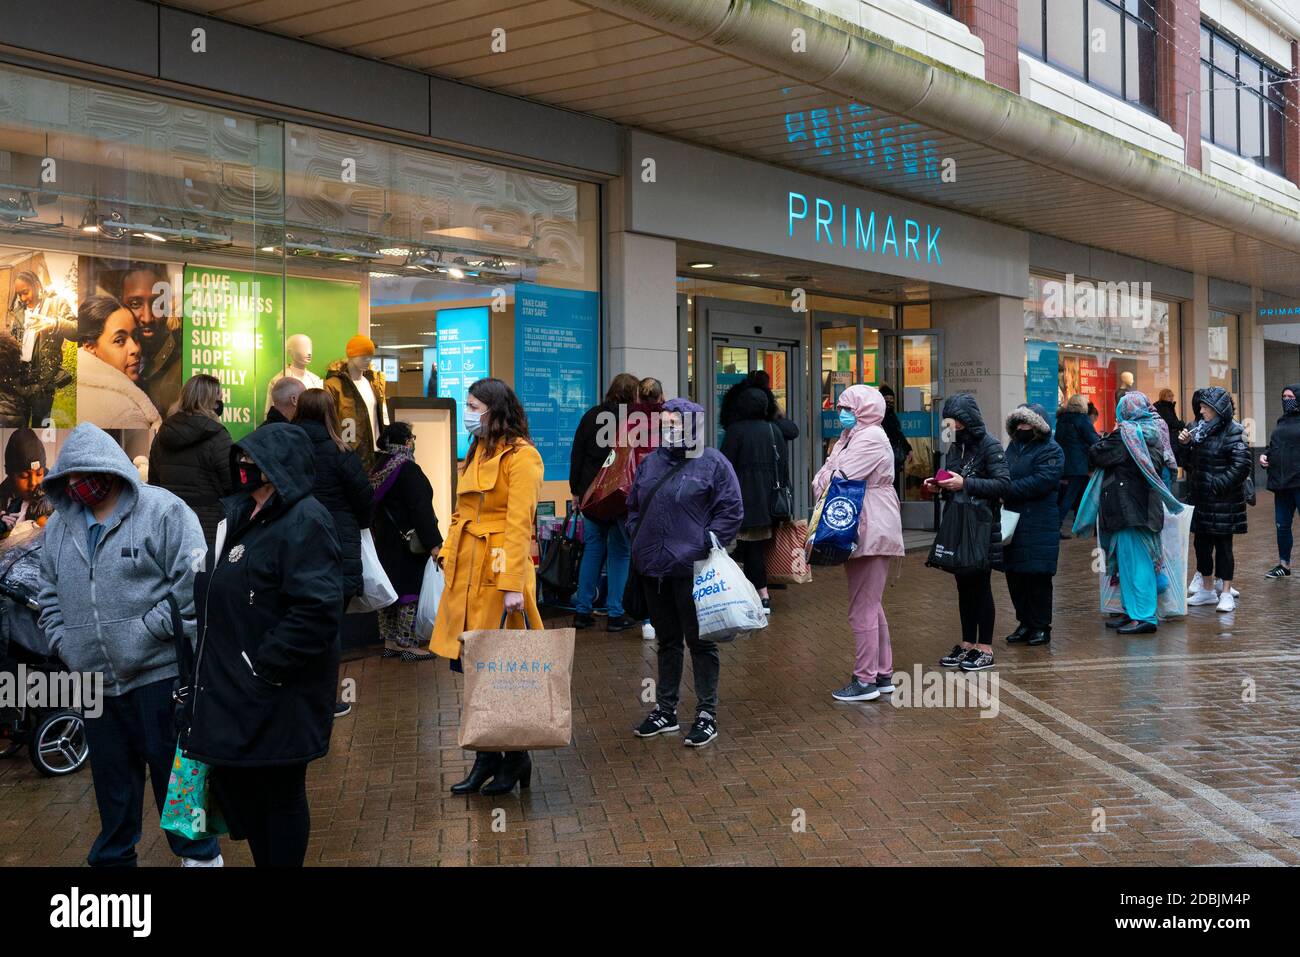 Motherwell, Scotland, UK. 1 November 2020. The Scottish Government today announced that from Friday 20 November, the most severe level 4 lockdown will be introduced in eleven Scottish council areas. This means non essential shops will close and bars, restaurants and cafes. Pictured; Long queue outside Primark store. Non essential shops will close.   Iain Masterton/Alamy Live News Stock Photo